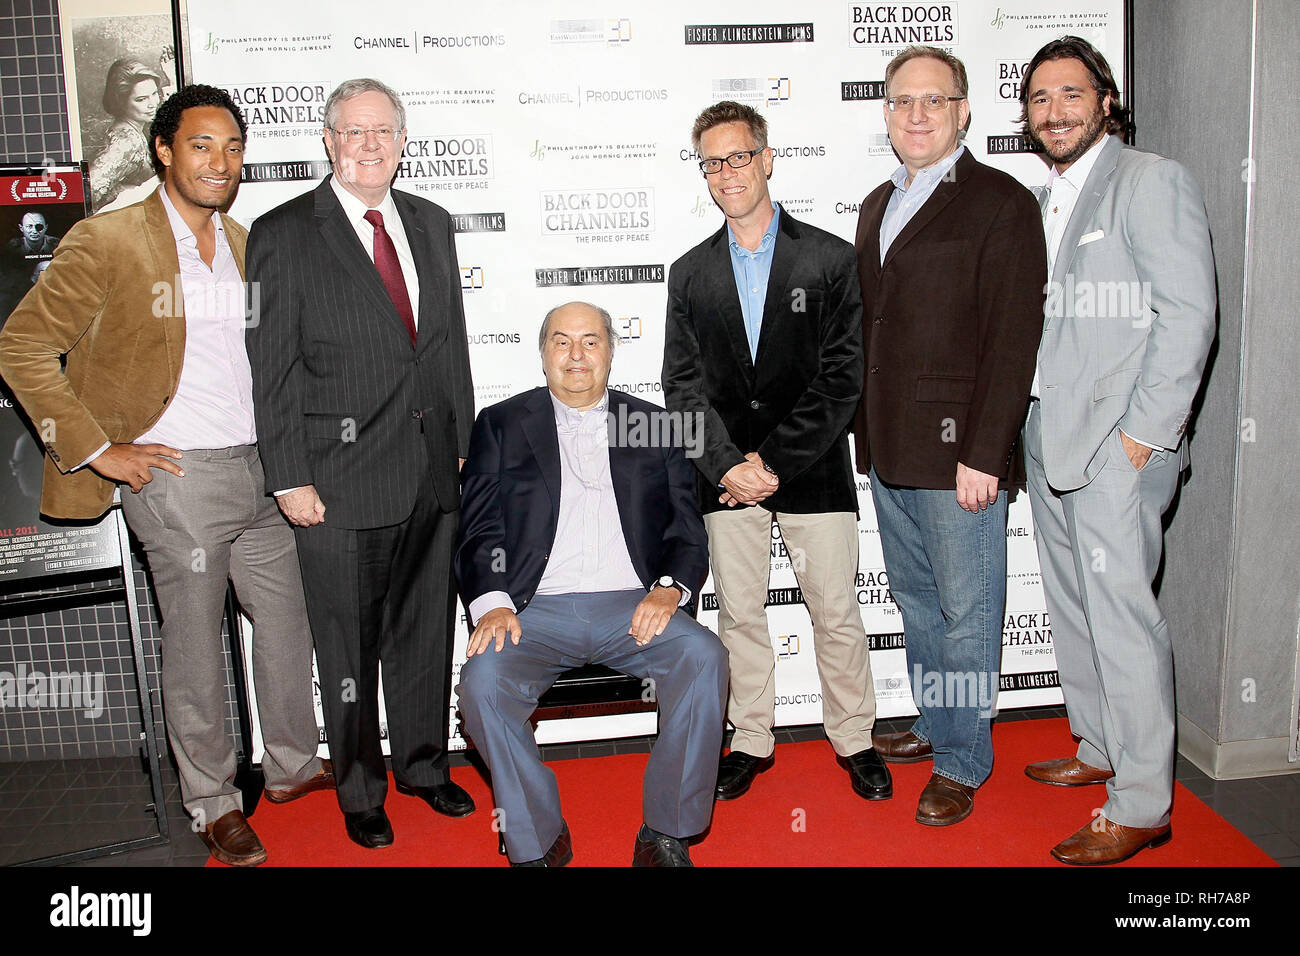 New York, USA. 18 Sep, 2011. Matthew Tollin, Steve Forbes, Leon Charney, Harry Hunkele, Danny Fisher, Sergio Fernandez de Cordova at The Sunday, Sep 18, 2011 Screening Of Film 'Back Door Channel: The Price Of Peace' at Quad Cinema in New York, USA. Credit: Steve Mack/S.D. Mack Pictures/Alamy Stock Photo